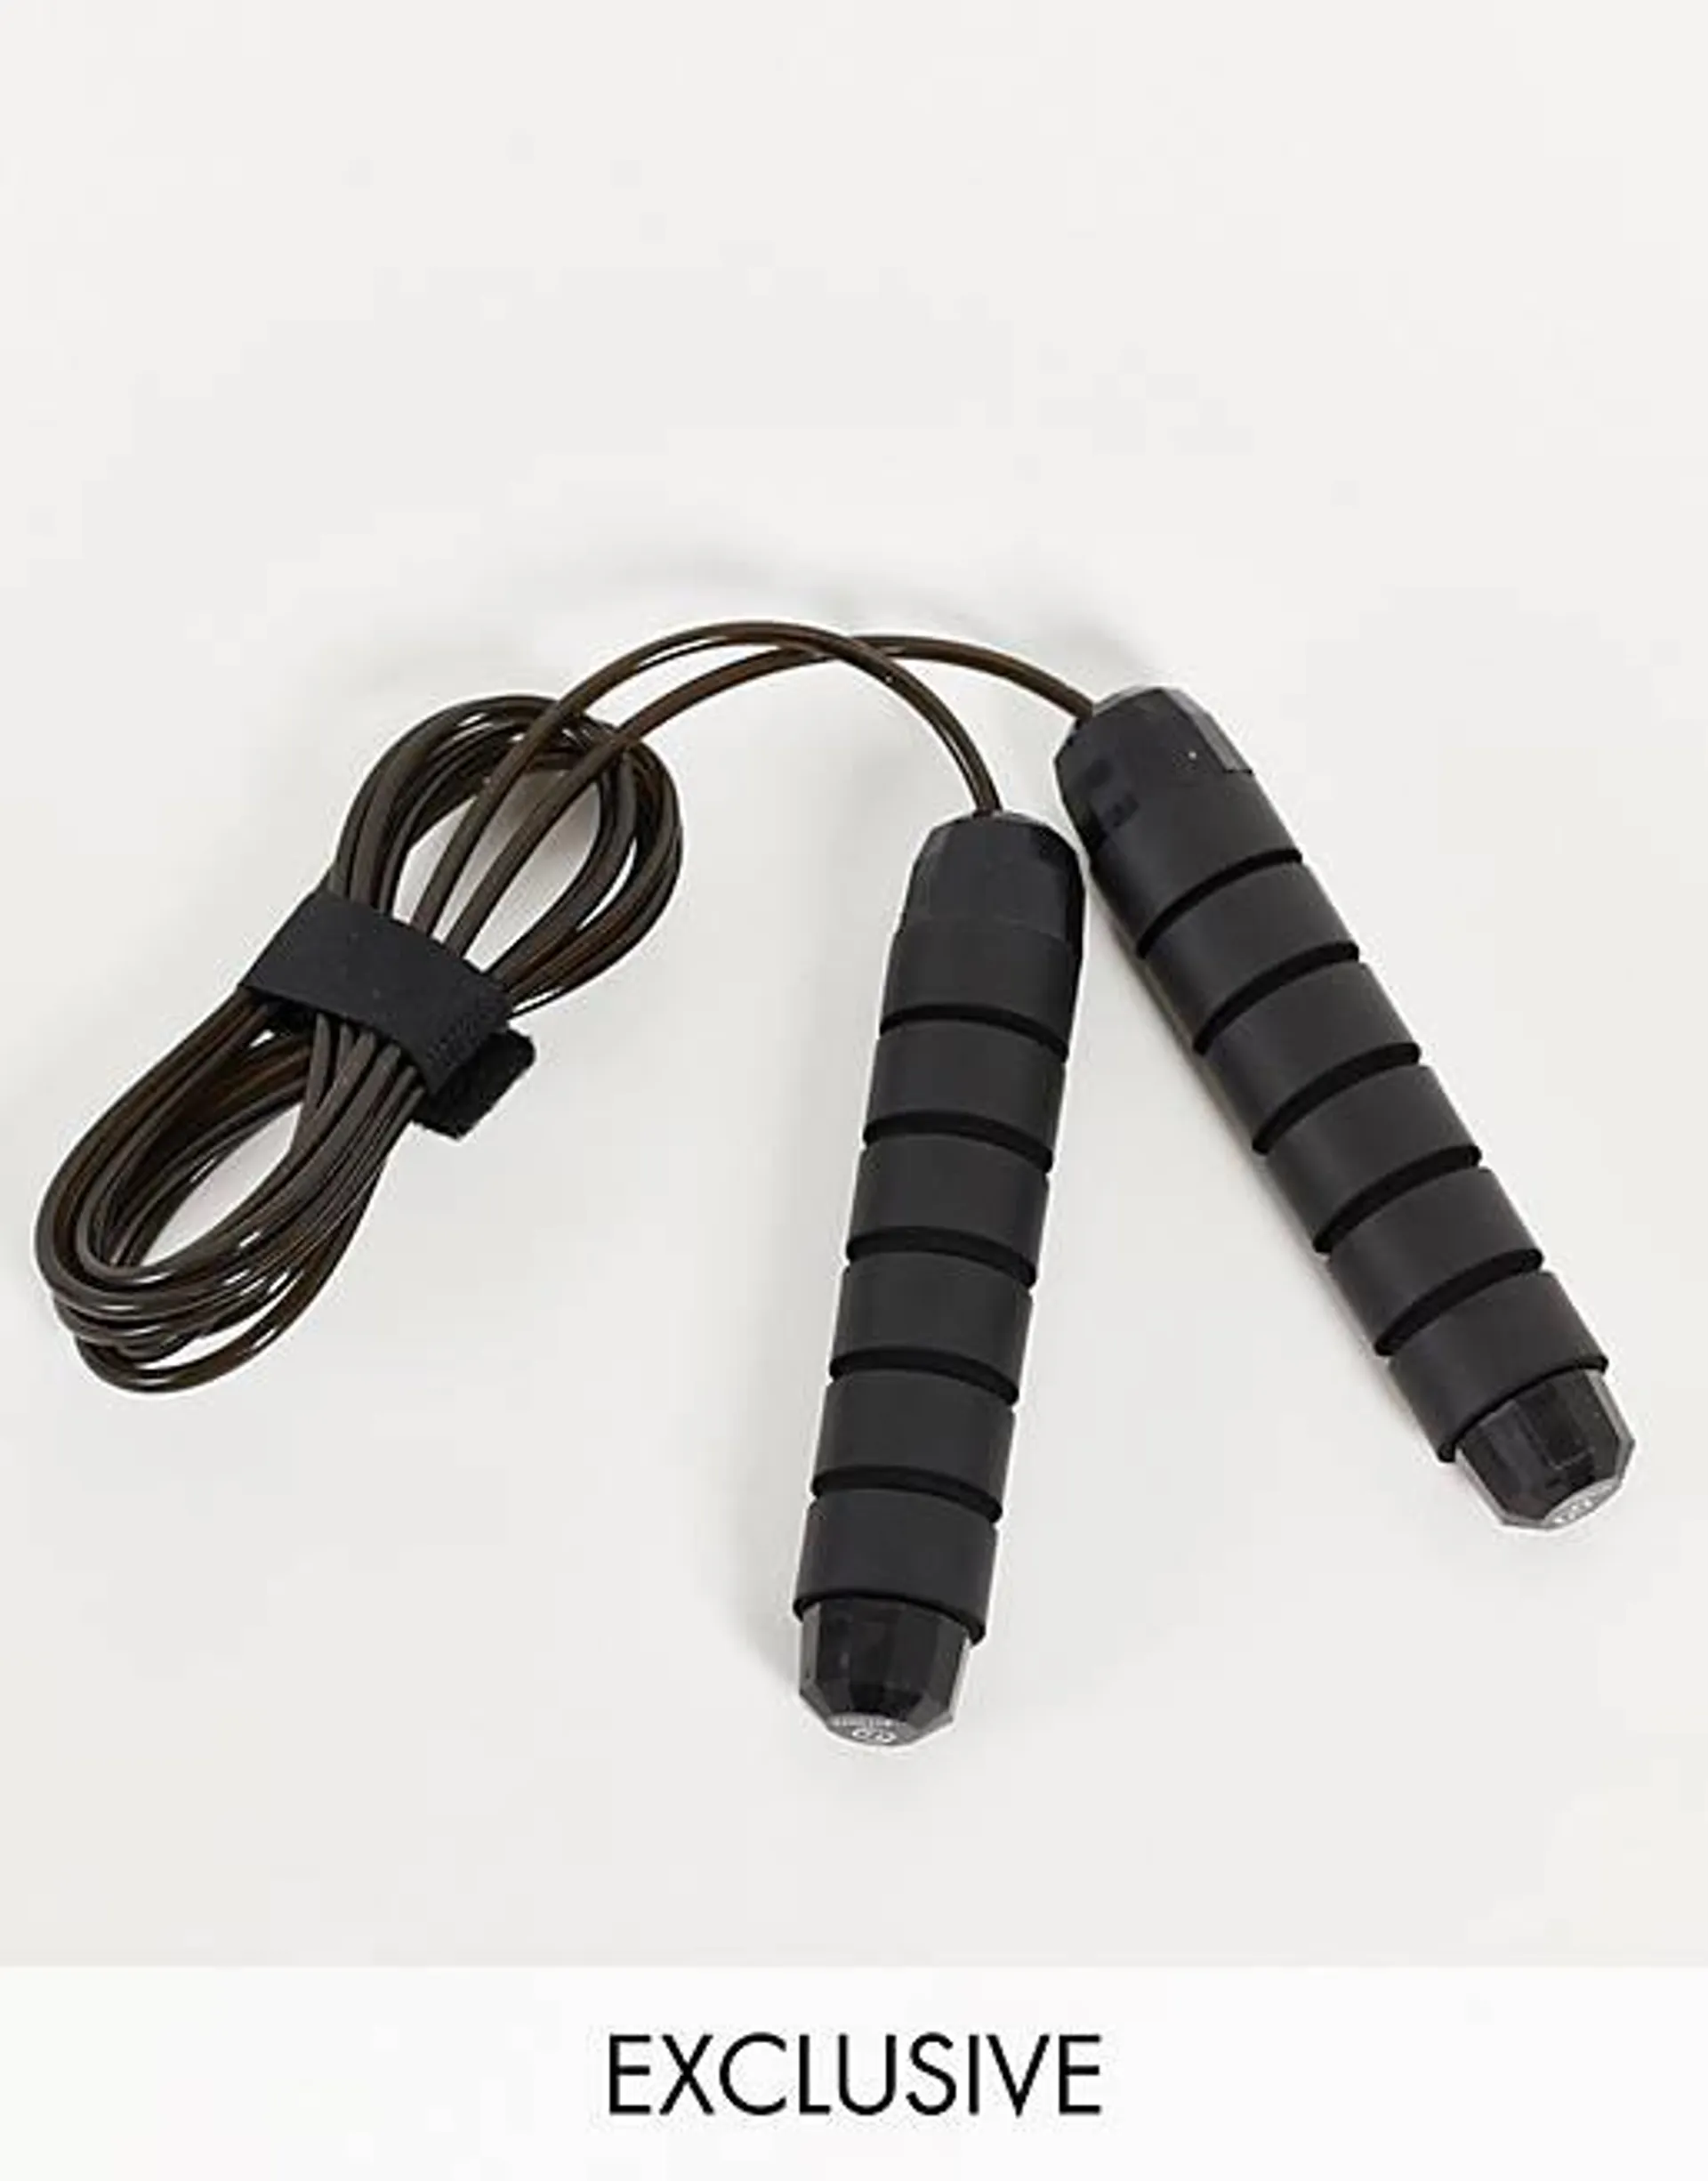 FITHUT 2.8m weighted skipping rope in black